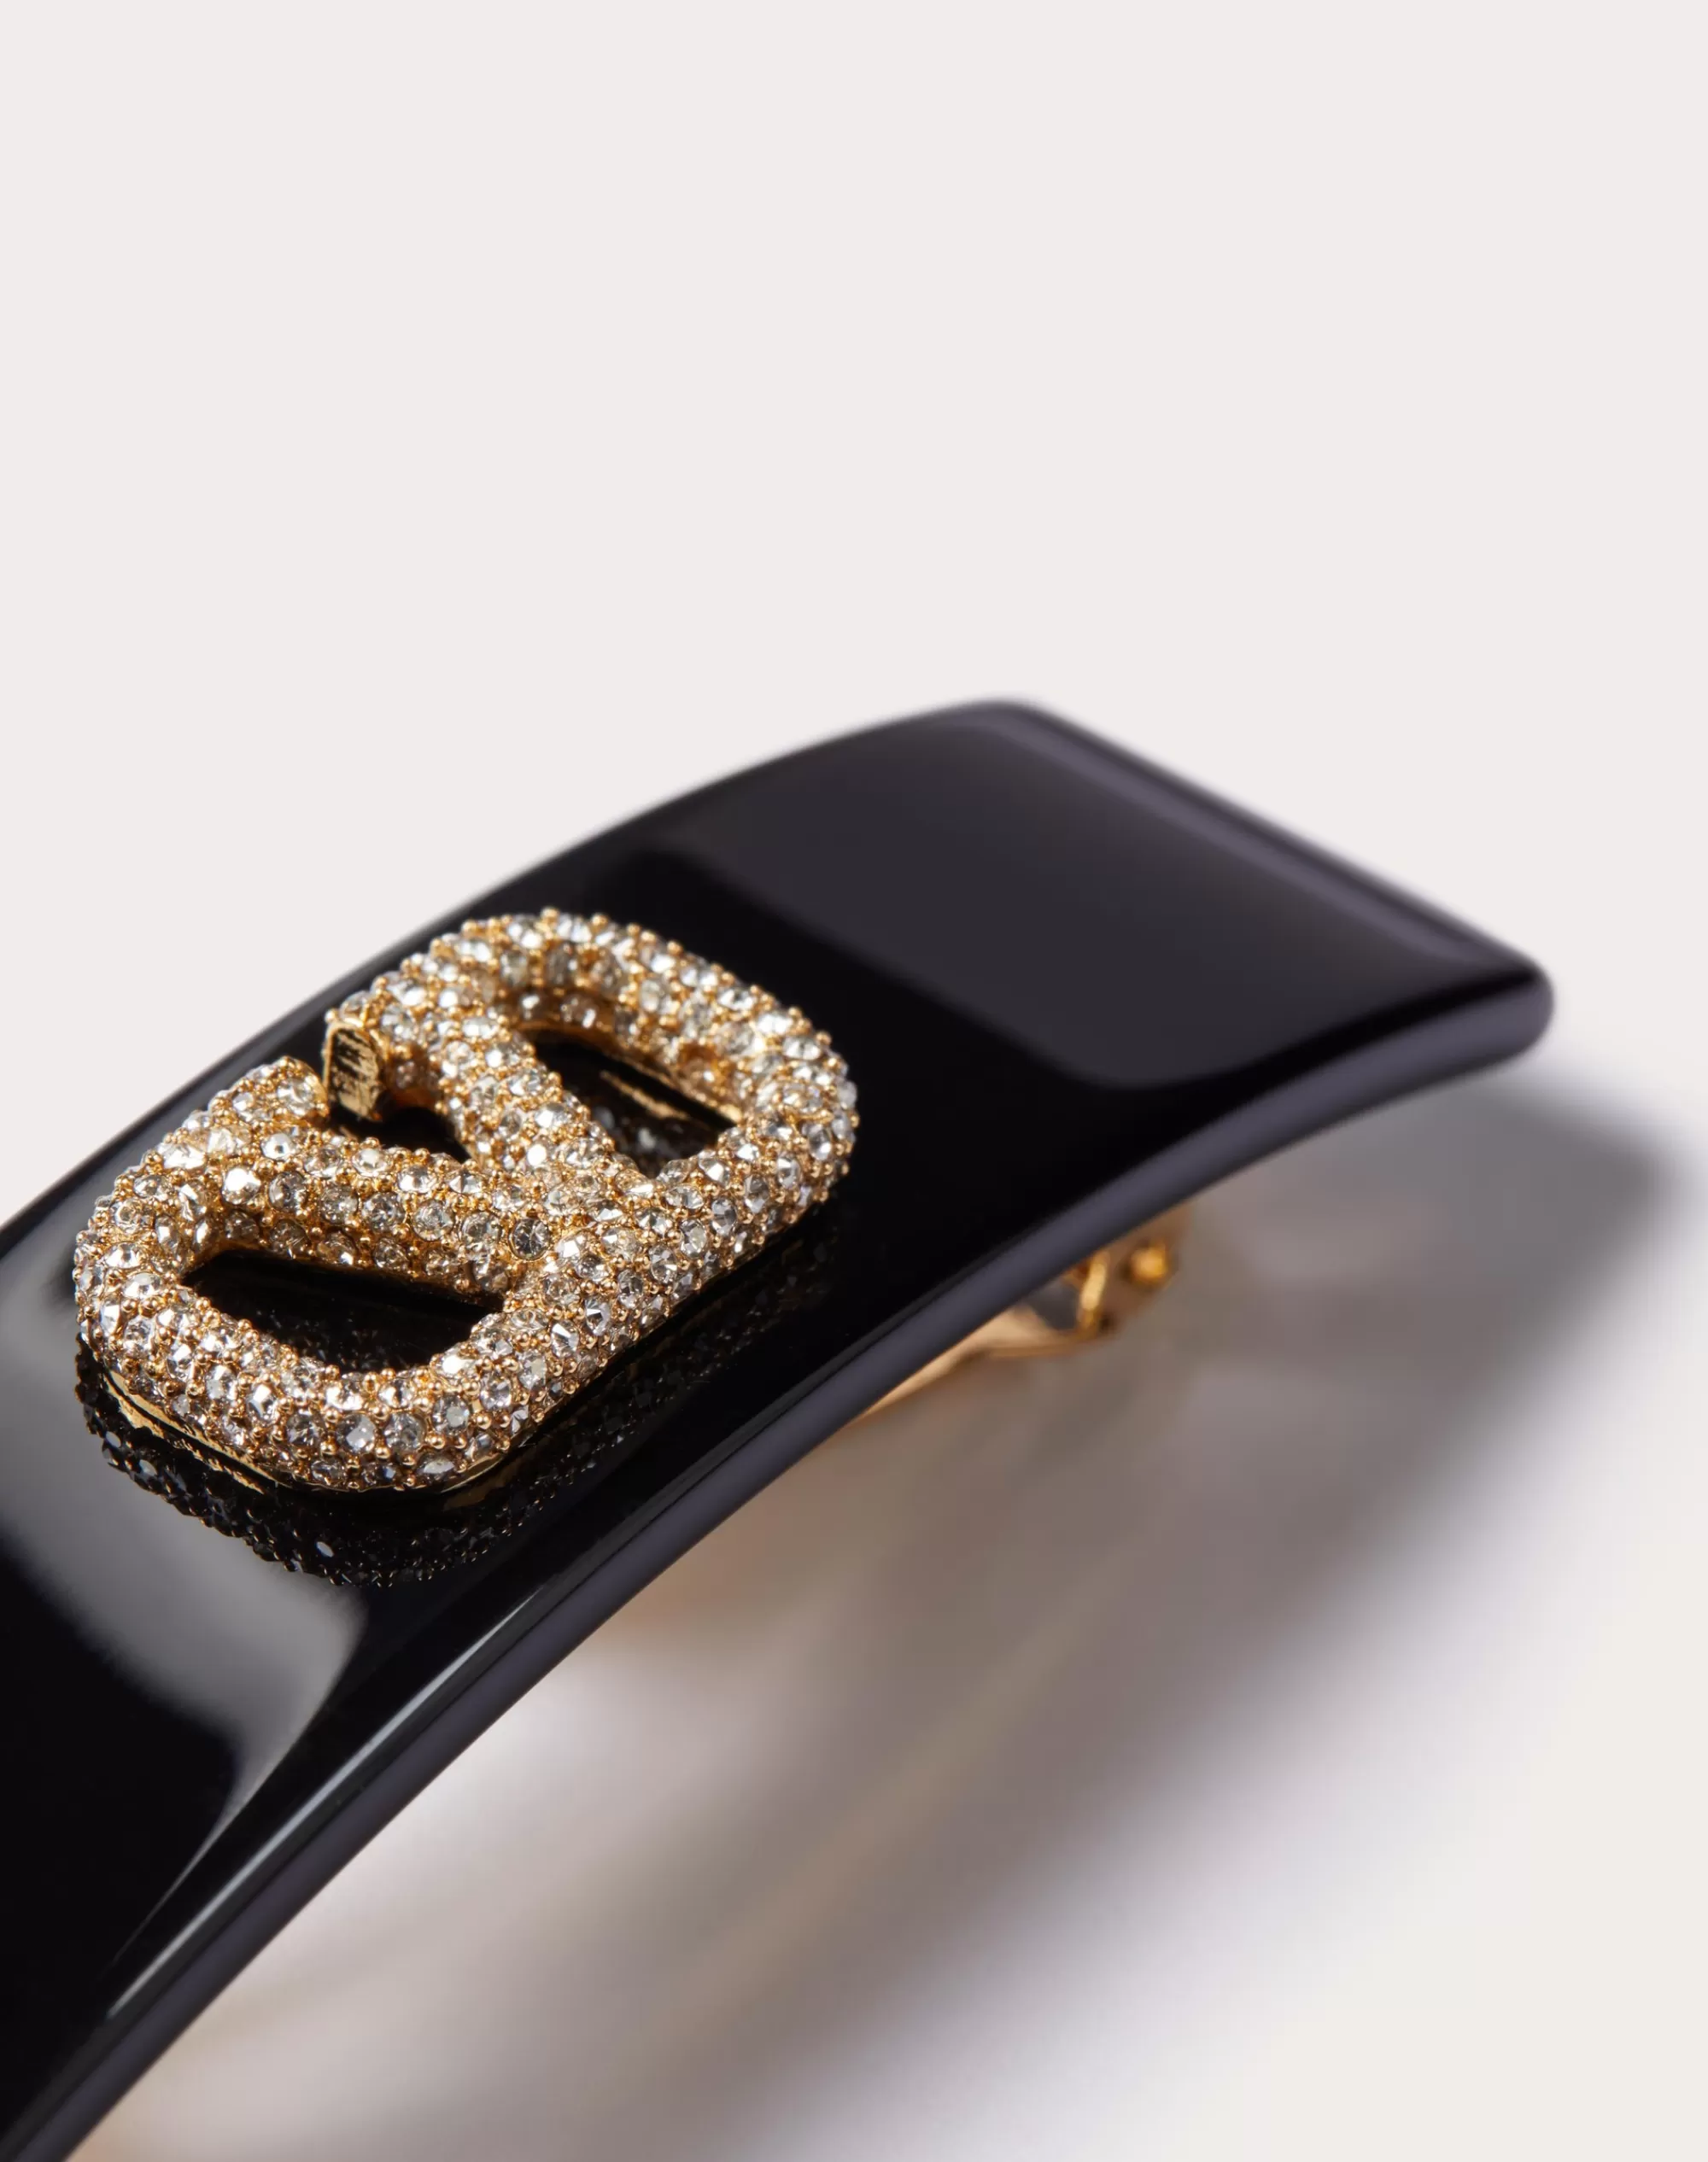 Valentino VLOGO SIGNATURE METAL AND RESIN HAIR CLIP WITH SWAROVSKI® CRYSTALS Black/gold/crystal Outlet